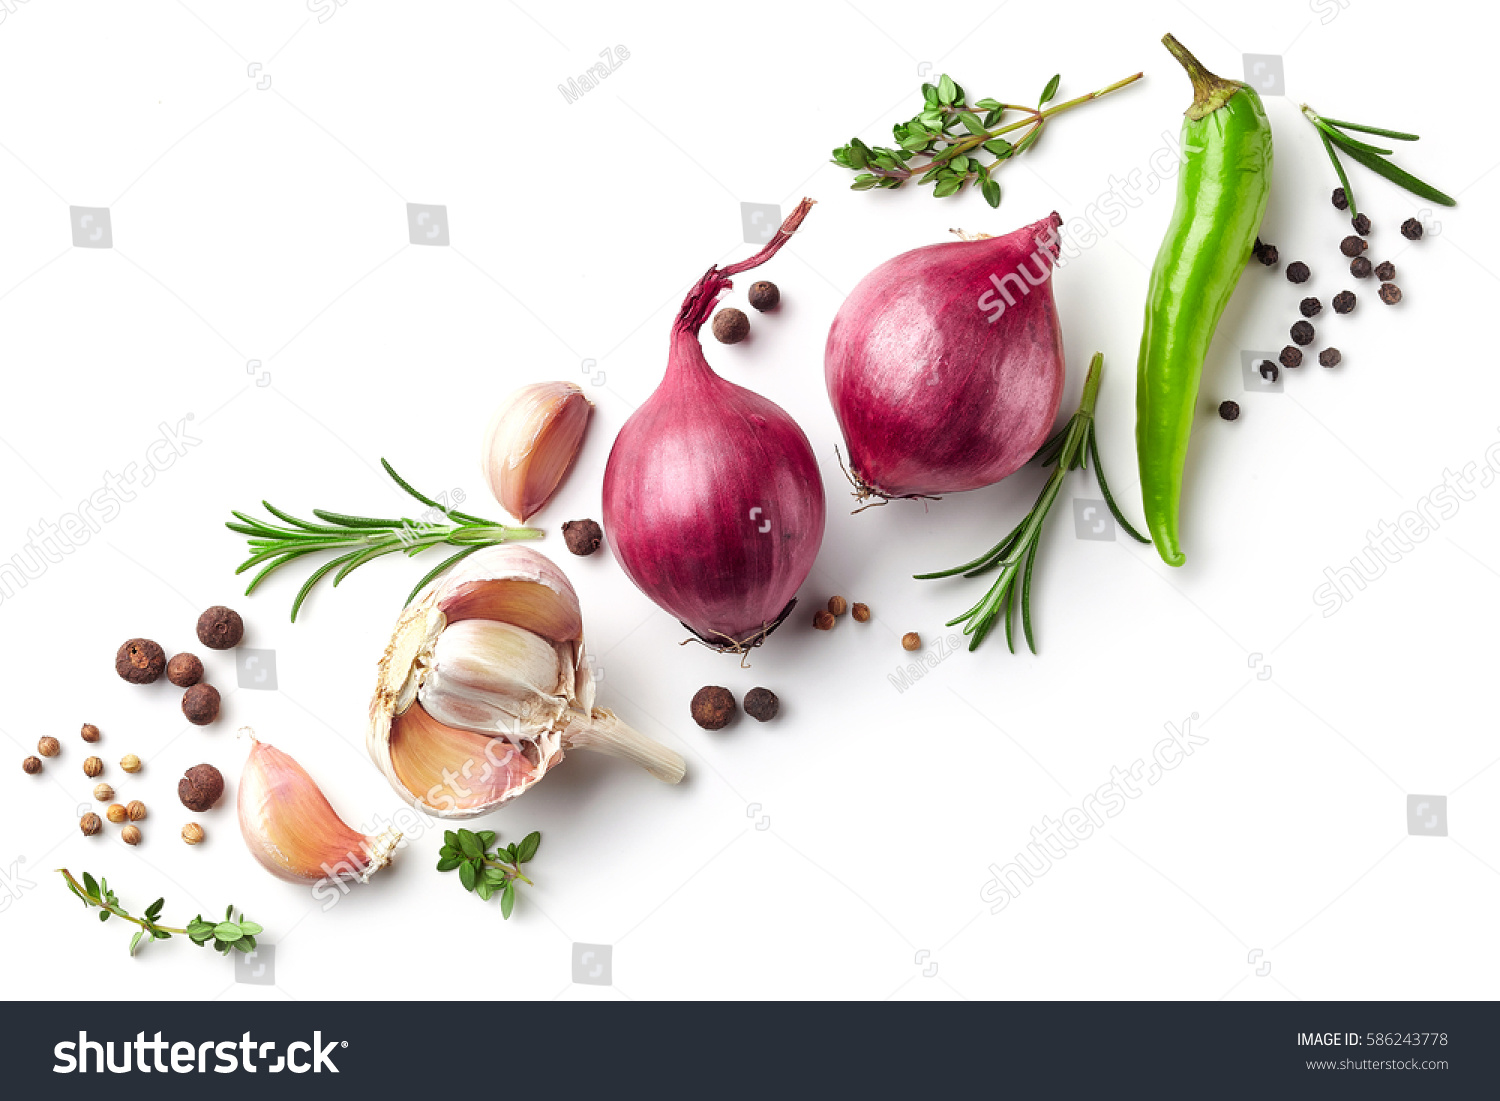 Diagonal composition of red onions, garlic and various spices isolated on white background, top view #586243778